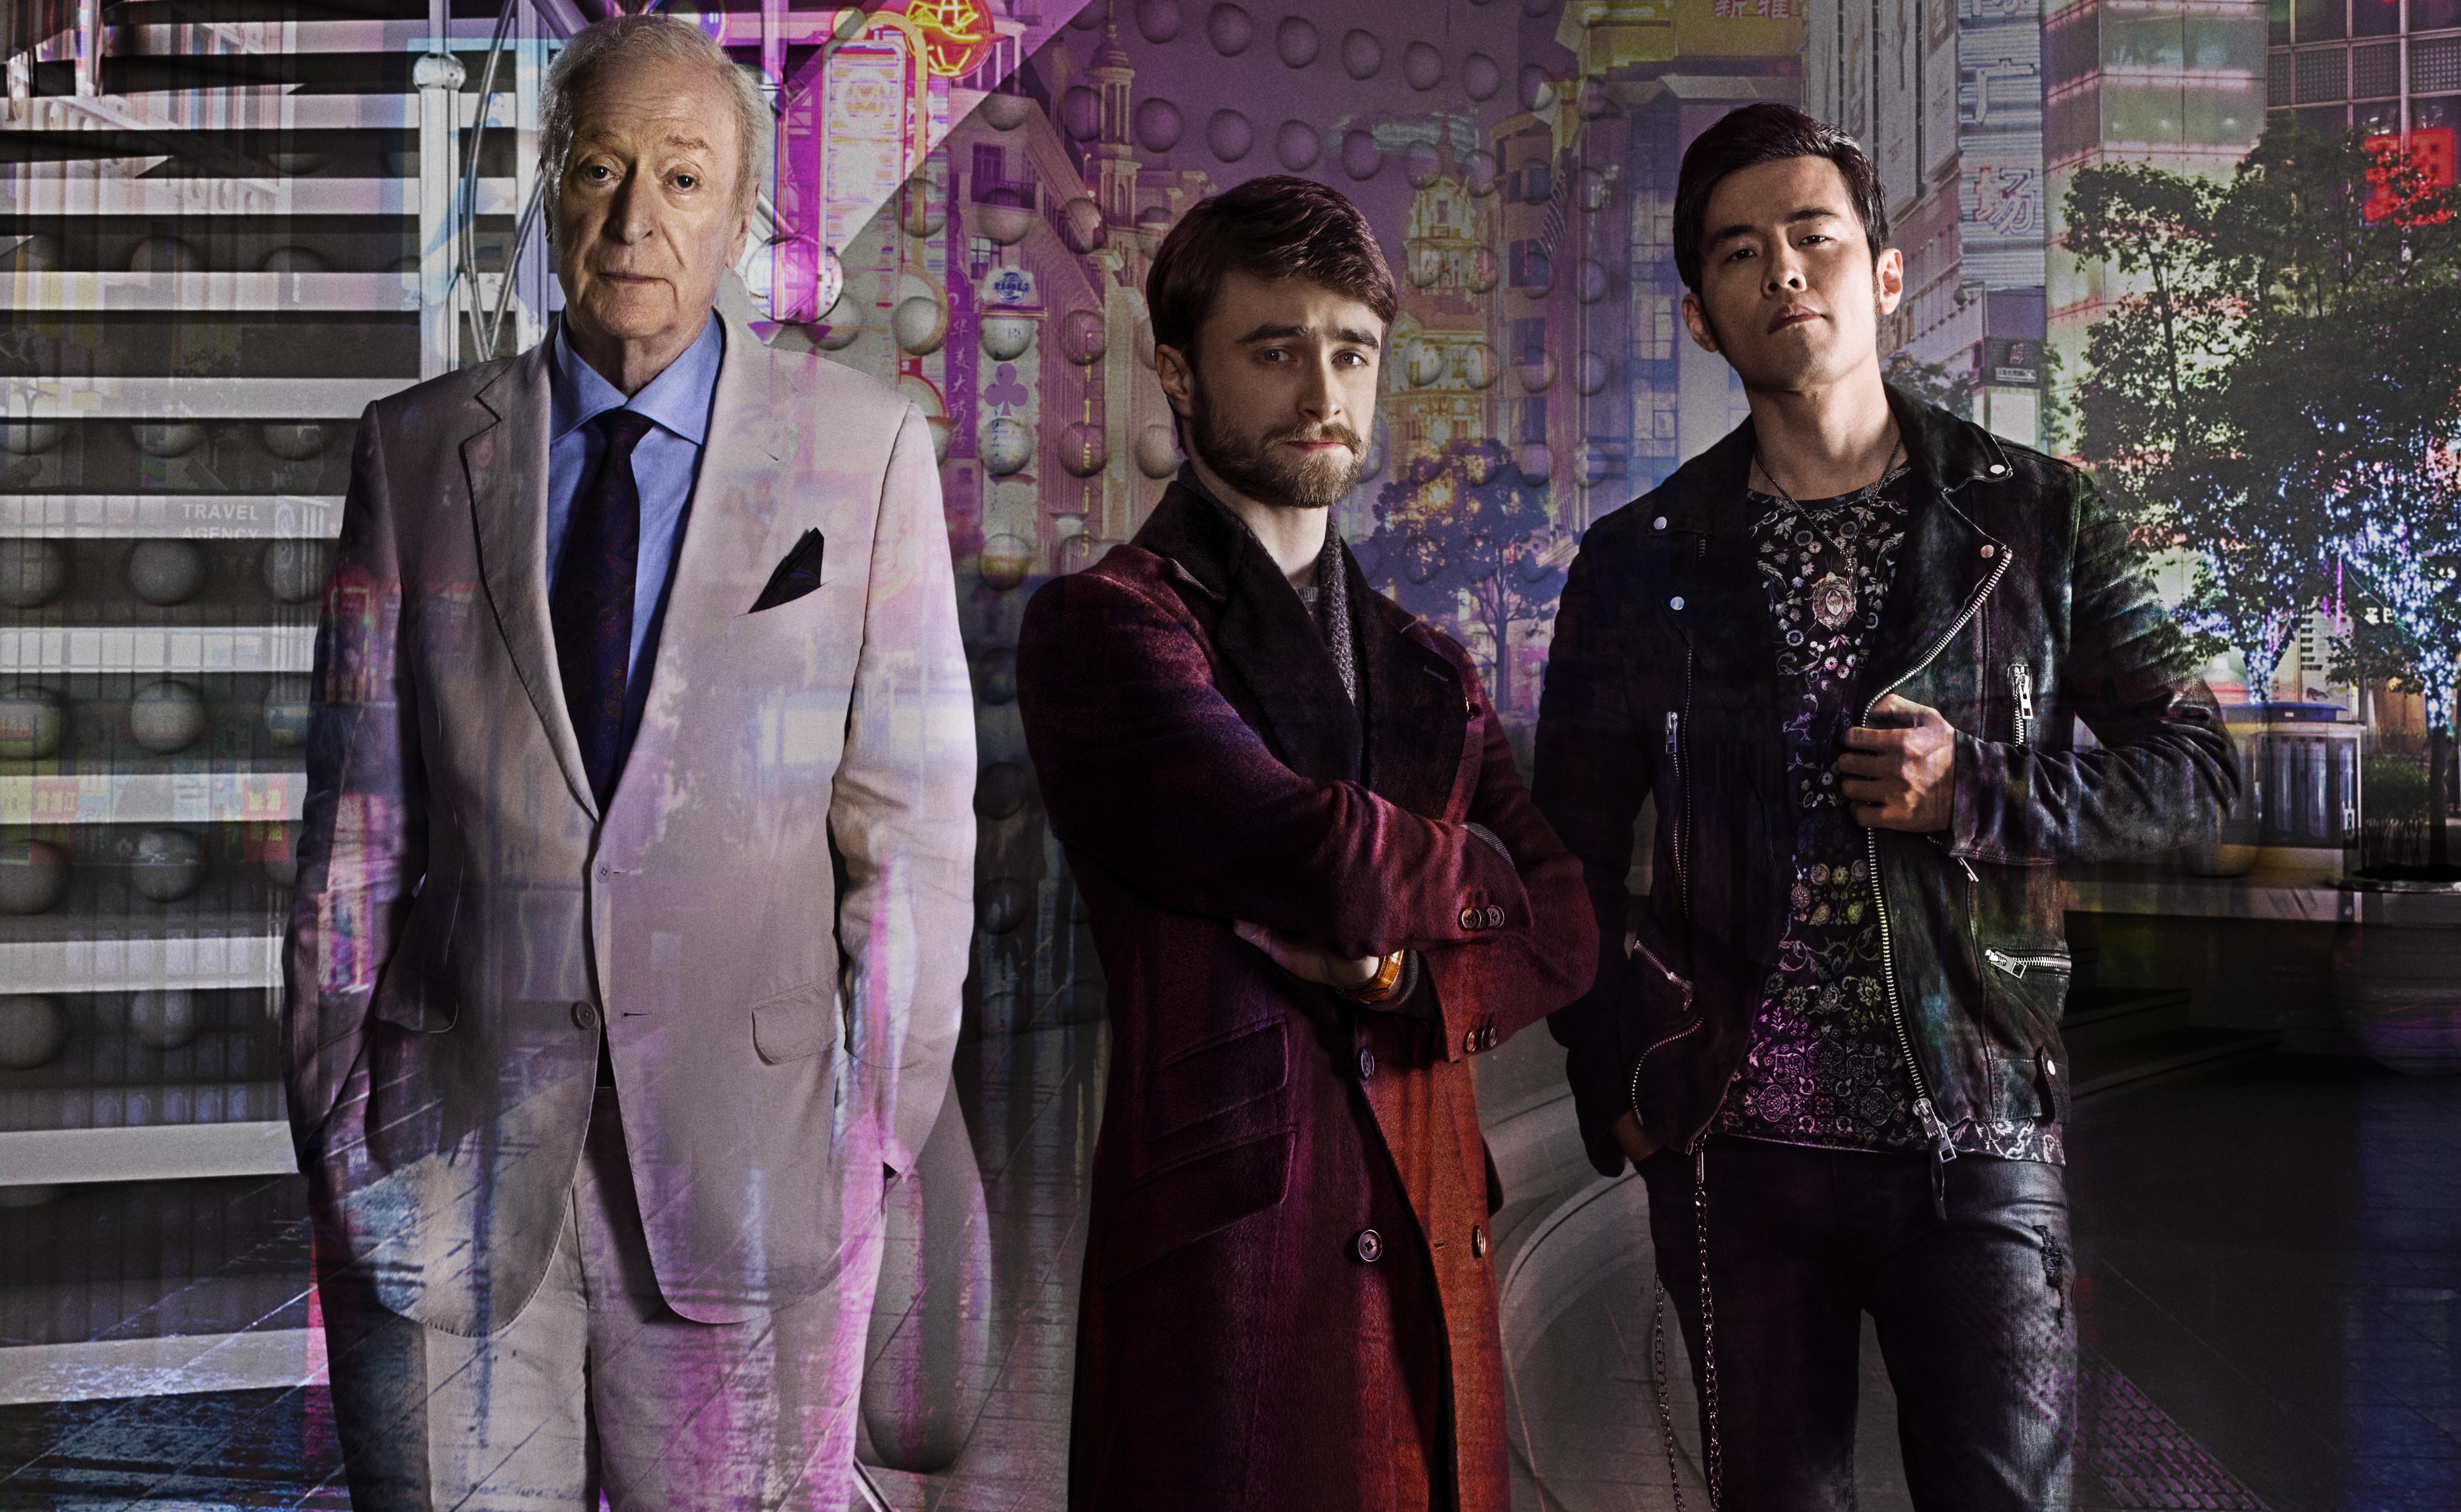 movie, now you see me 2, daniel radcliffe, jay chou, michael caine